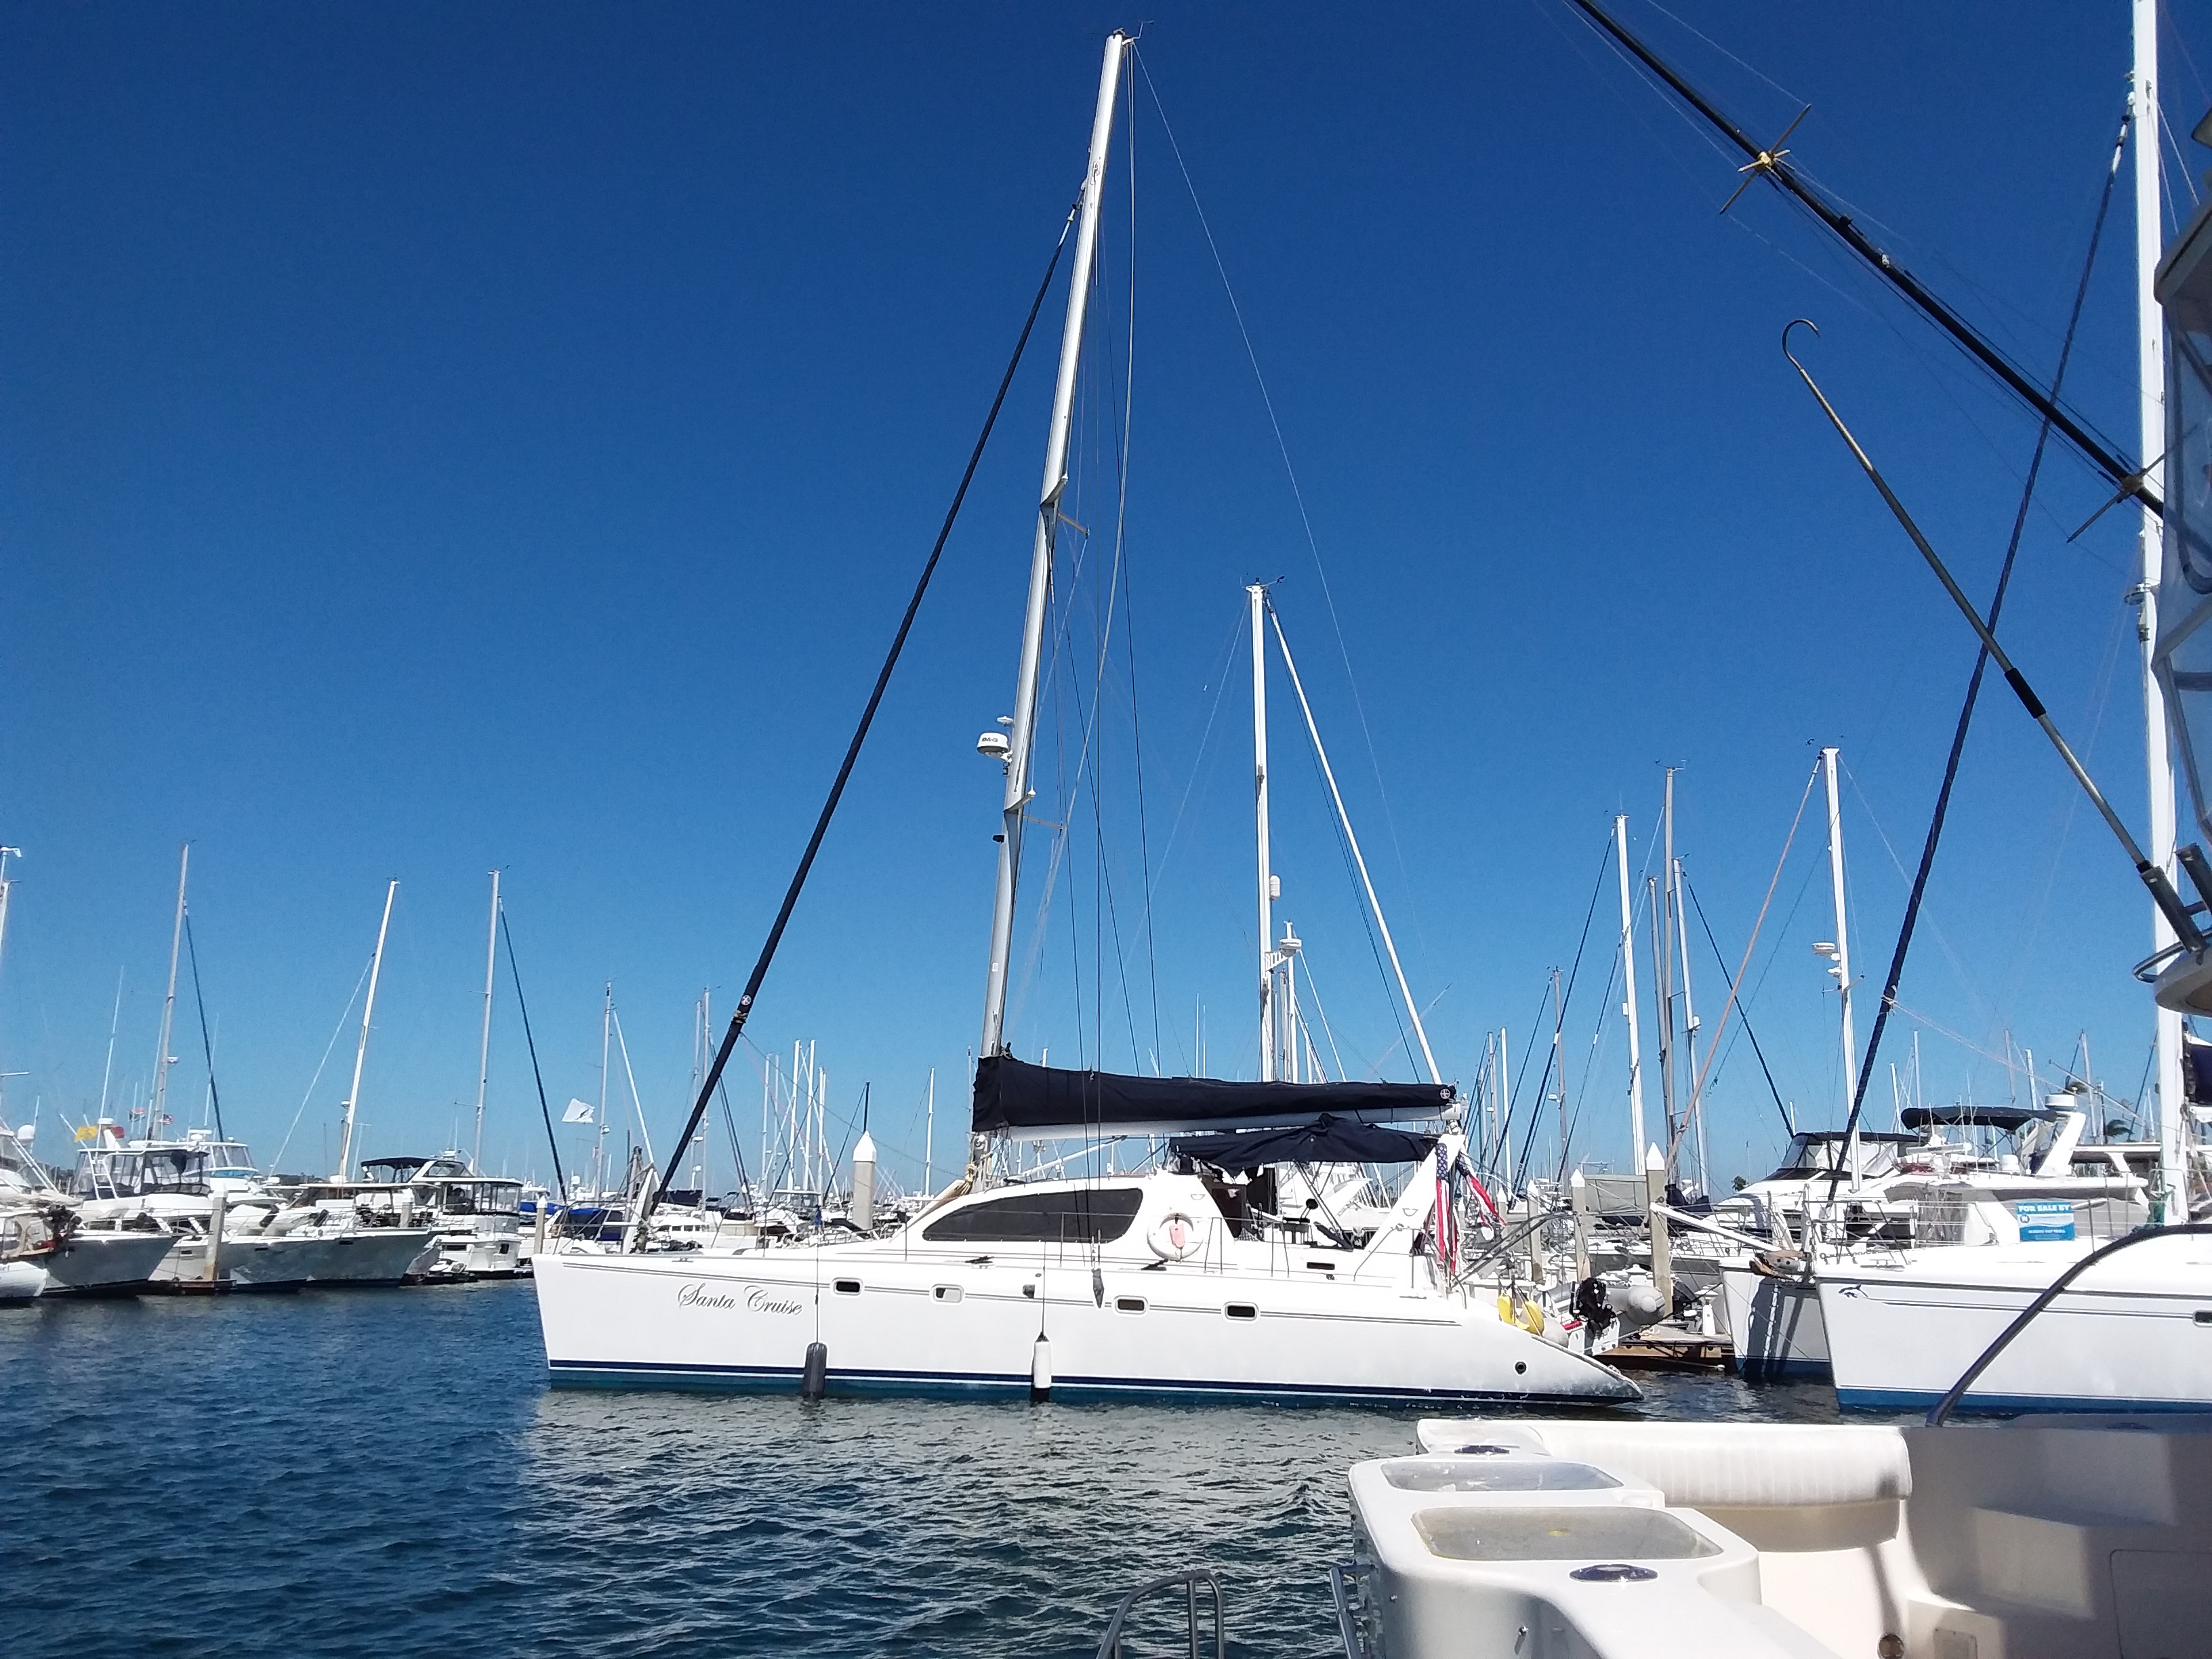 Used Sail Catamaran for Sale 2006 Leopard 47 Boat Highlights